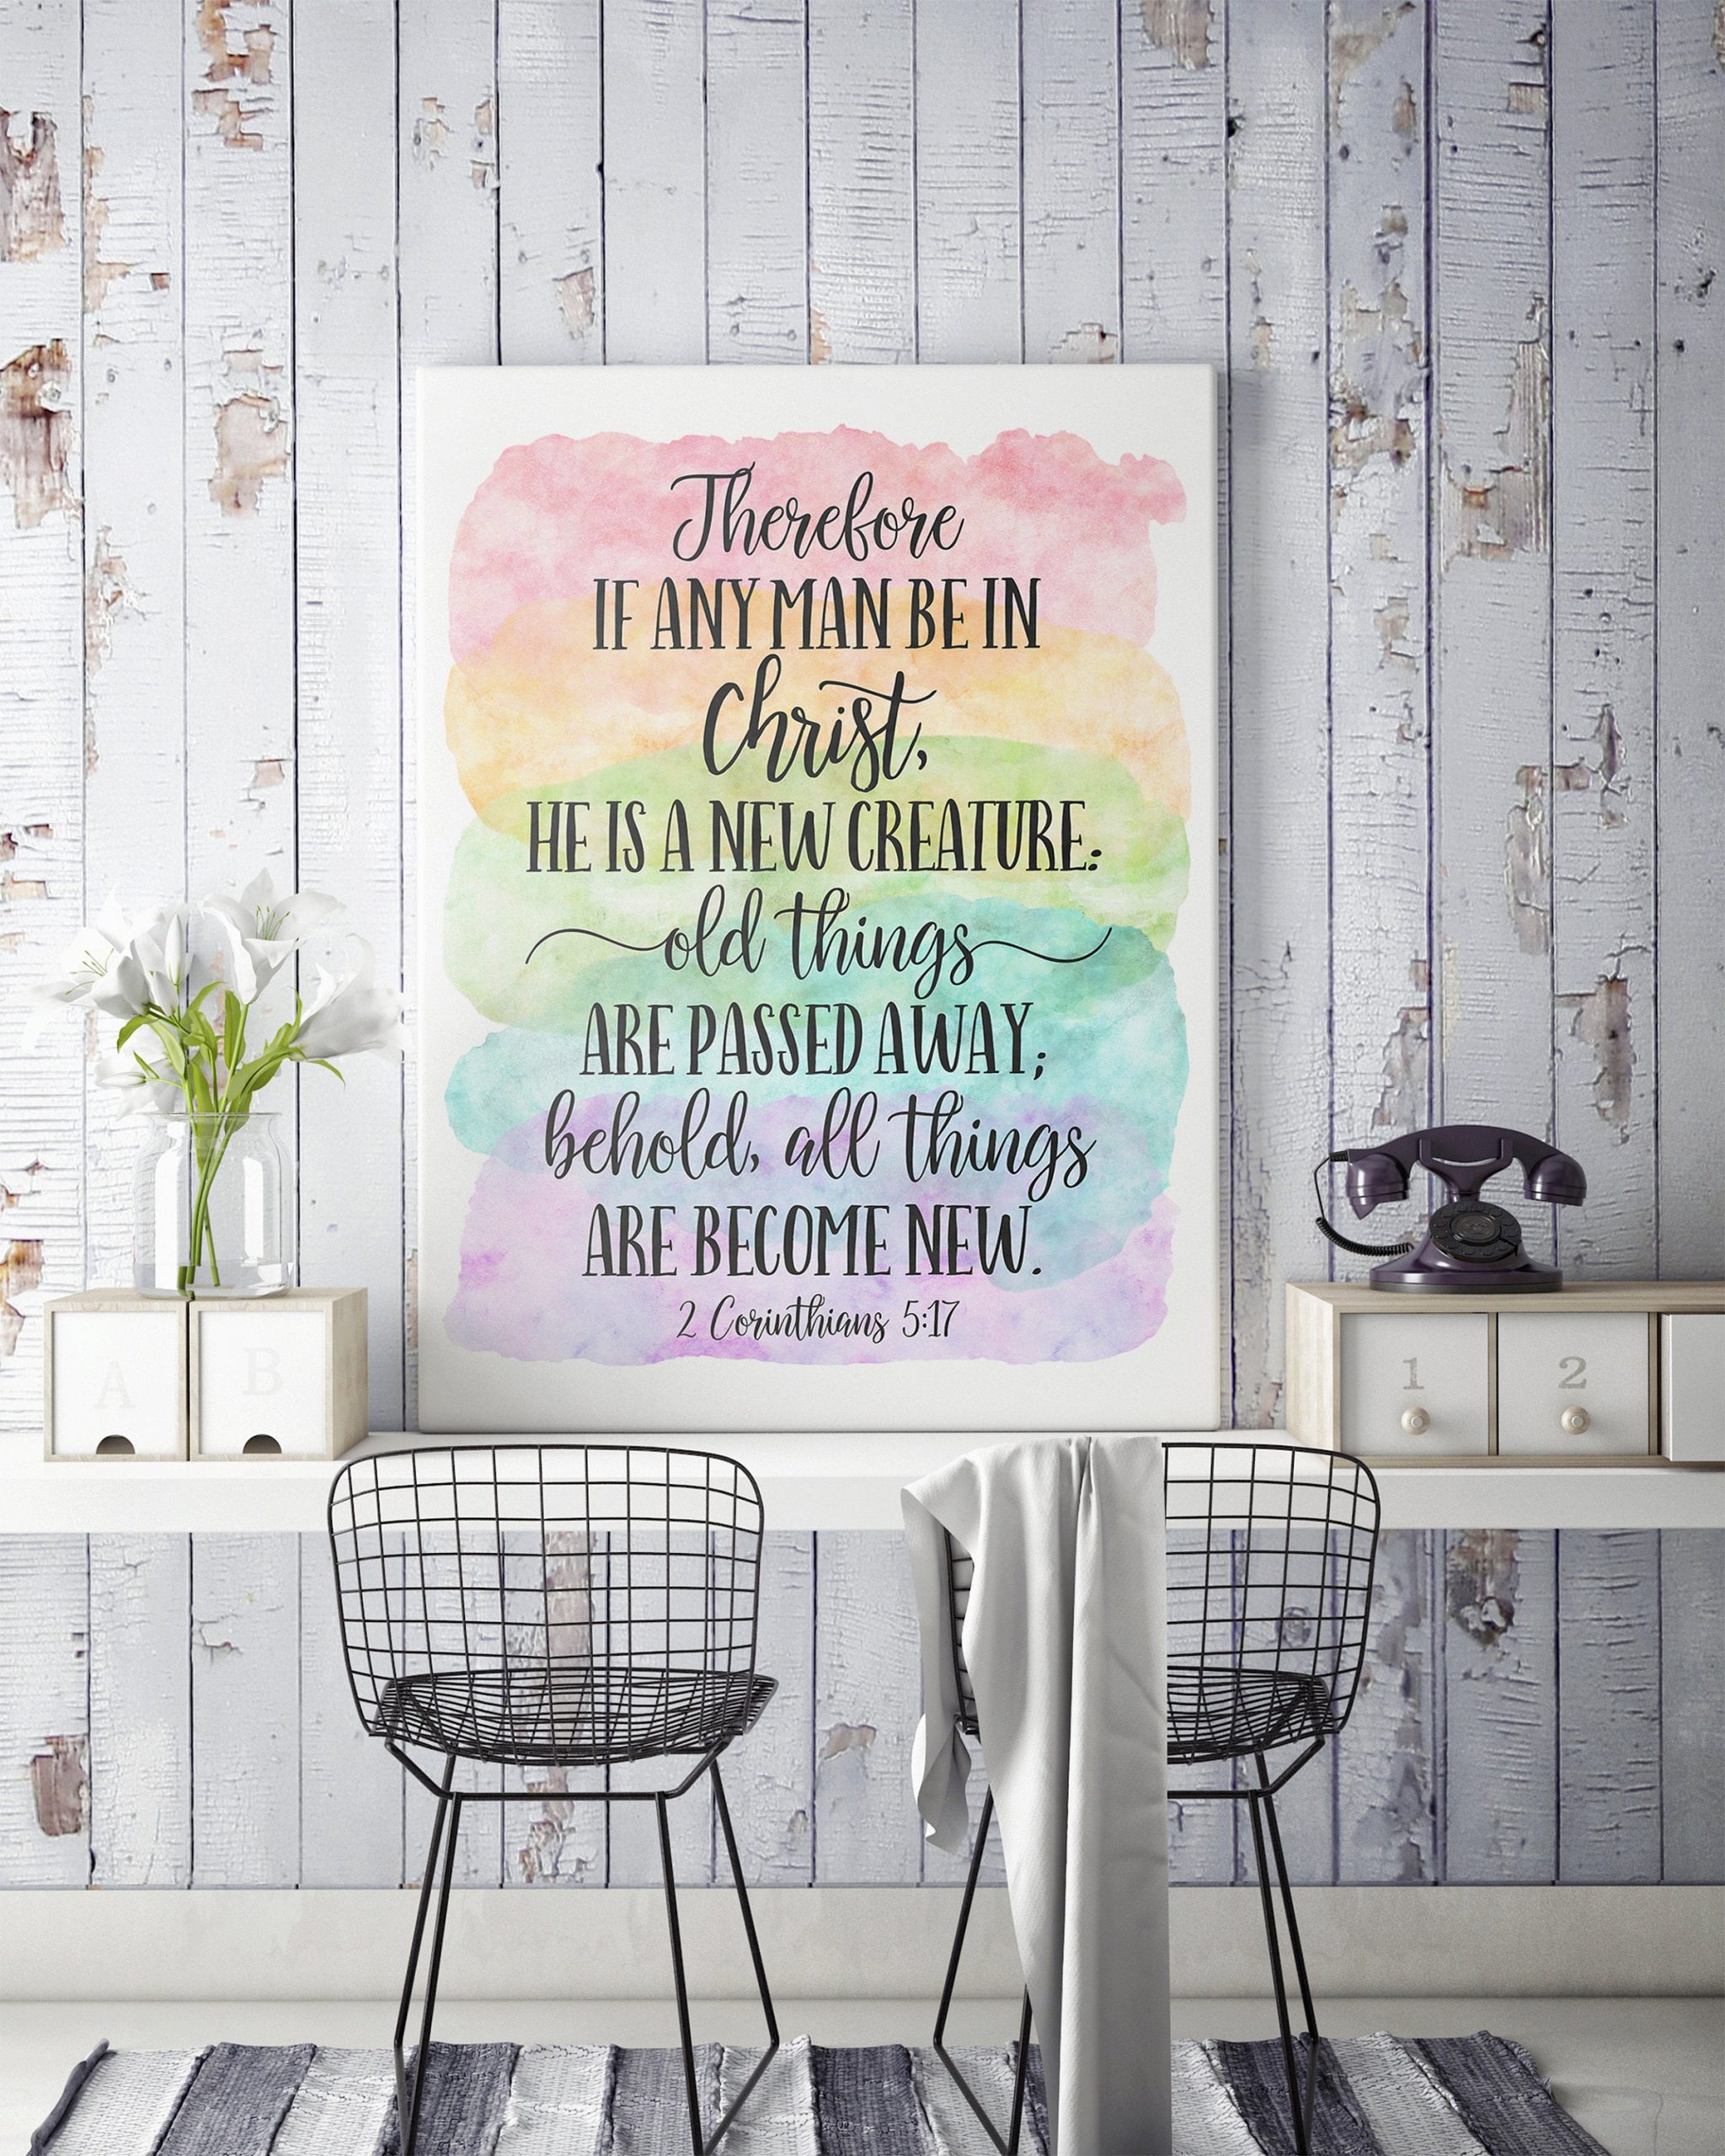 If Any Man Be In Christ, He Is A New Creature, 2 Corinthians 5:17, Printable Scripture Wall Art